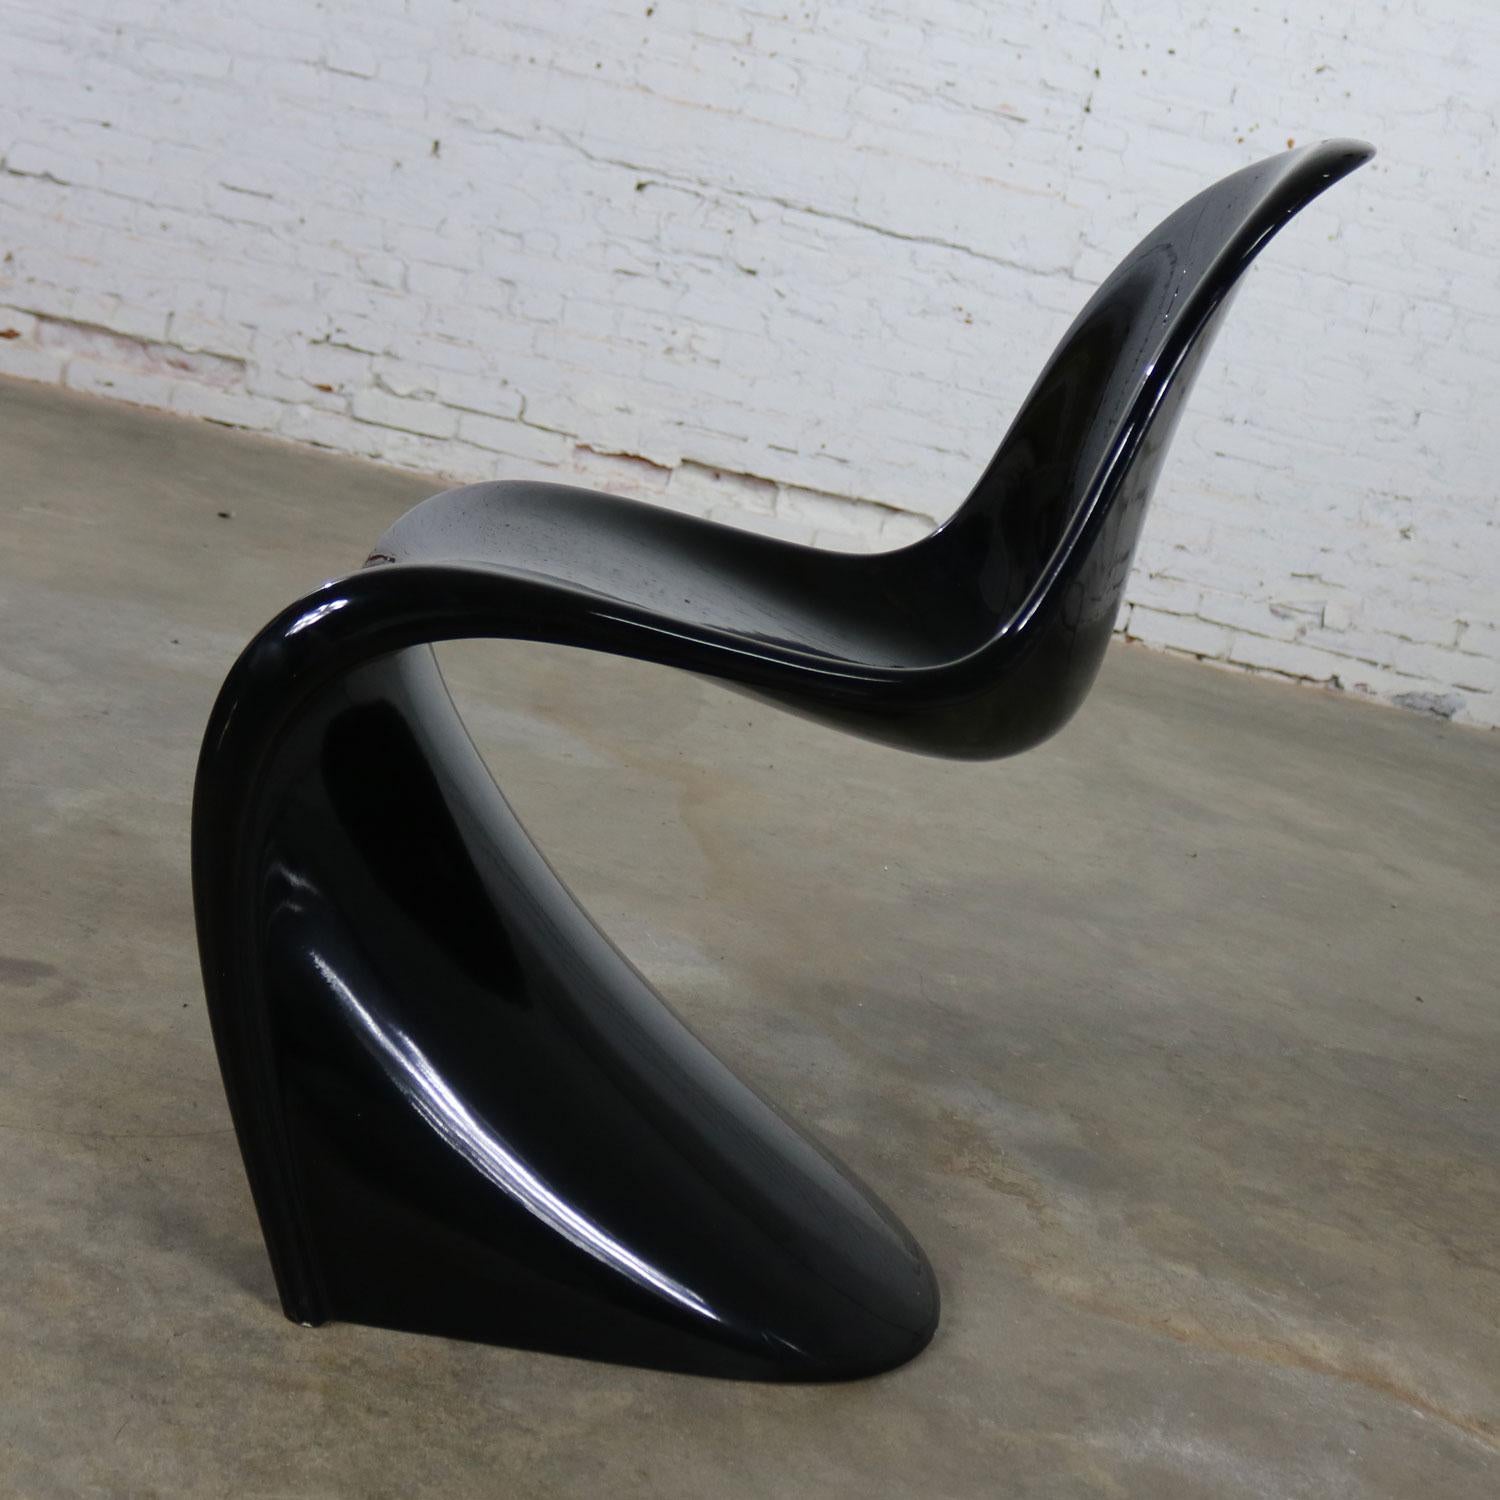 Swiss Gloss Black Verner Panton Chair Classic Molded S Chair by Vitra Signed